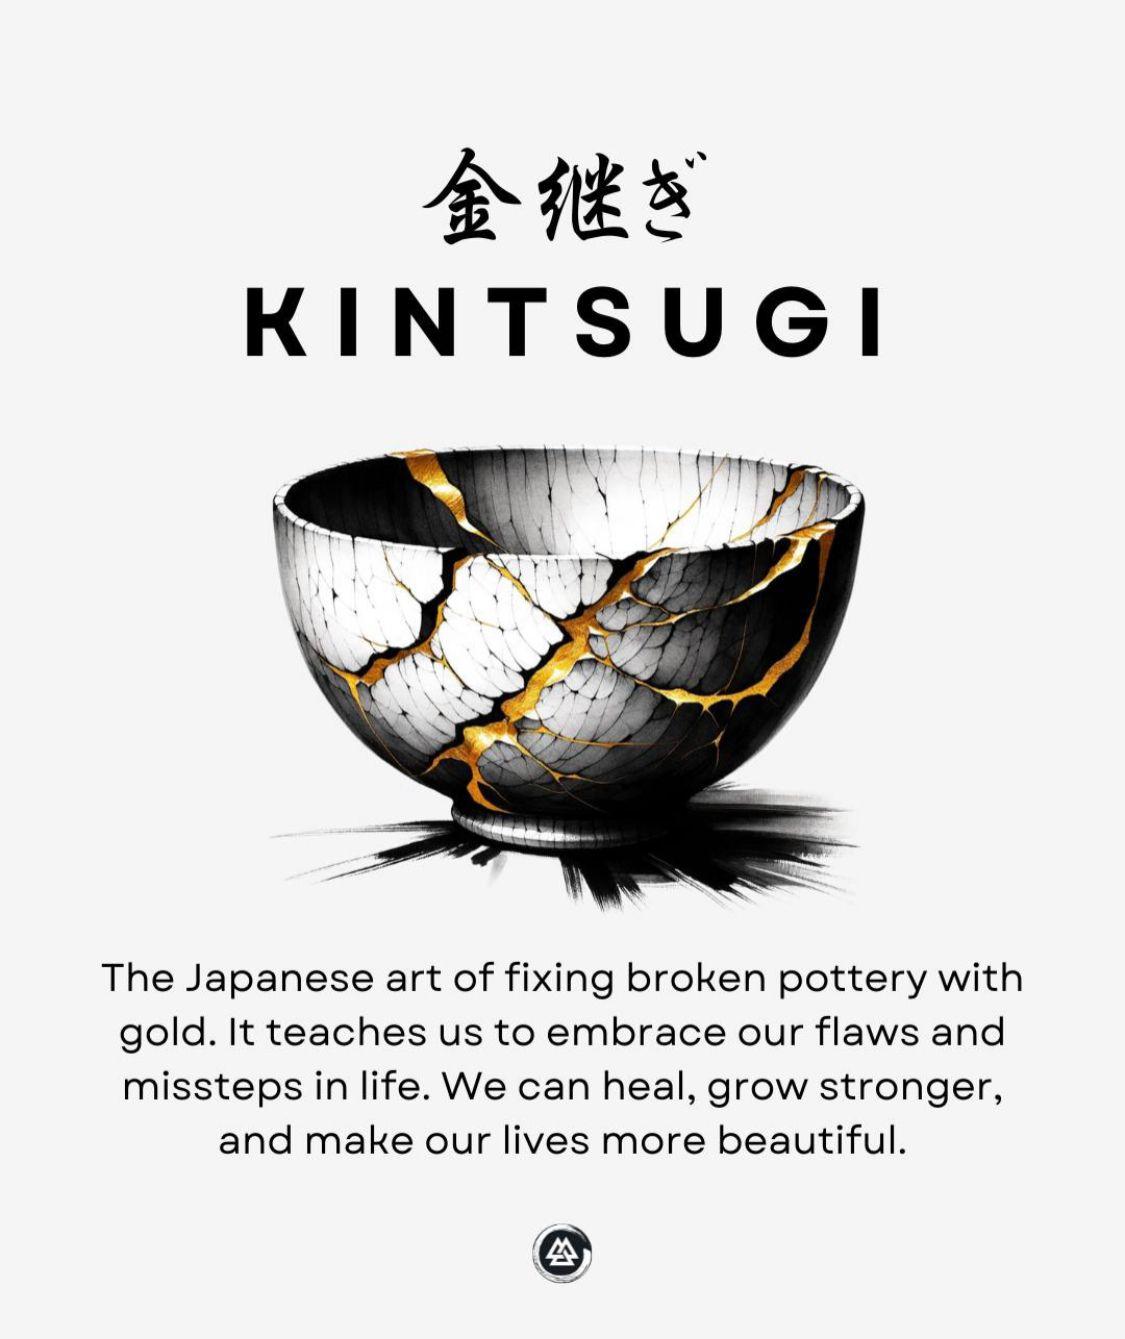 Kintsugi : The Japanese art of fixing broken pottery with gold. It teaches us to embrace our flaws and missteps in life.